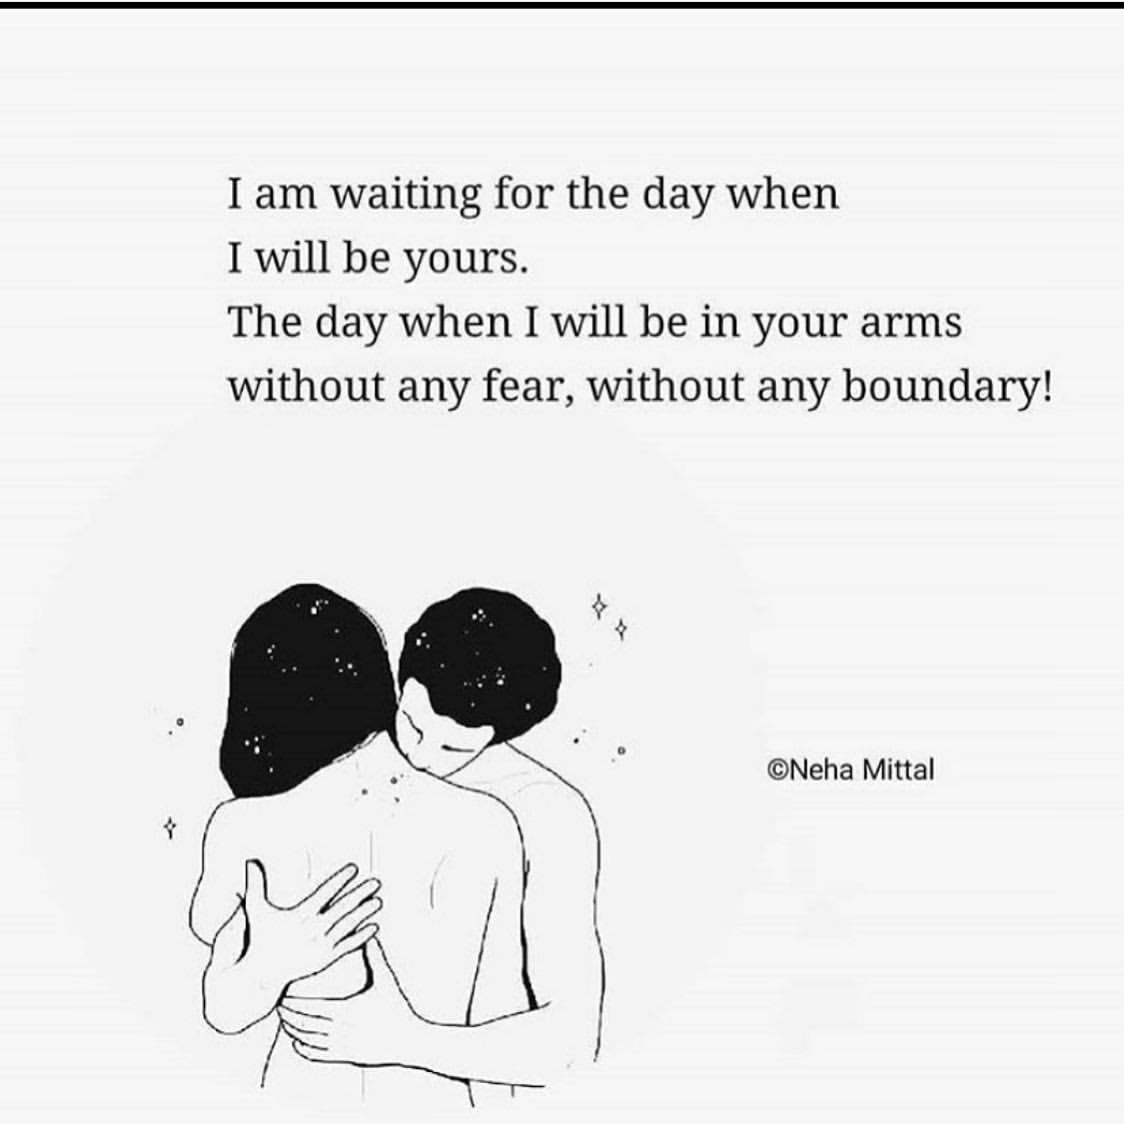 I am waiting for the day when I will be yours. The day when I will be in your arms without any fear, without any boundary!